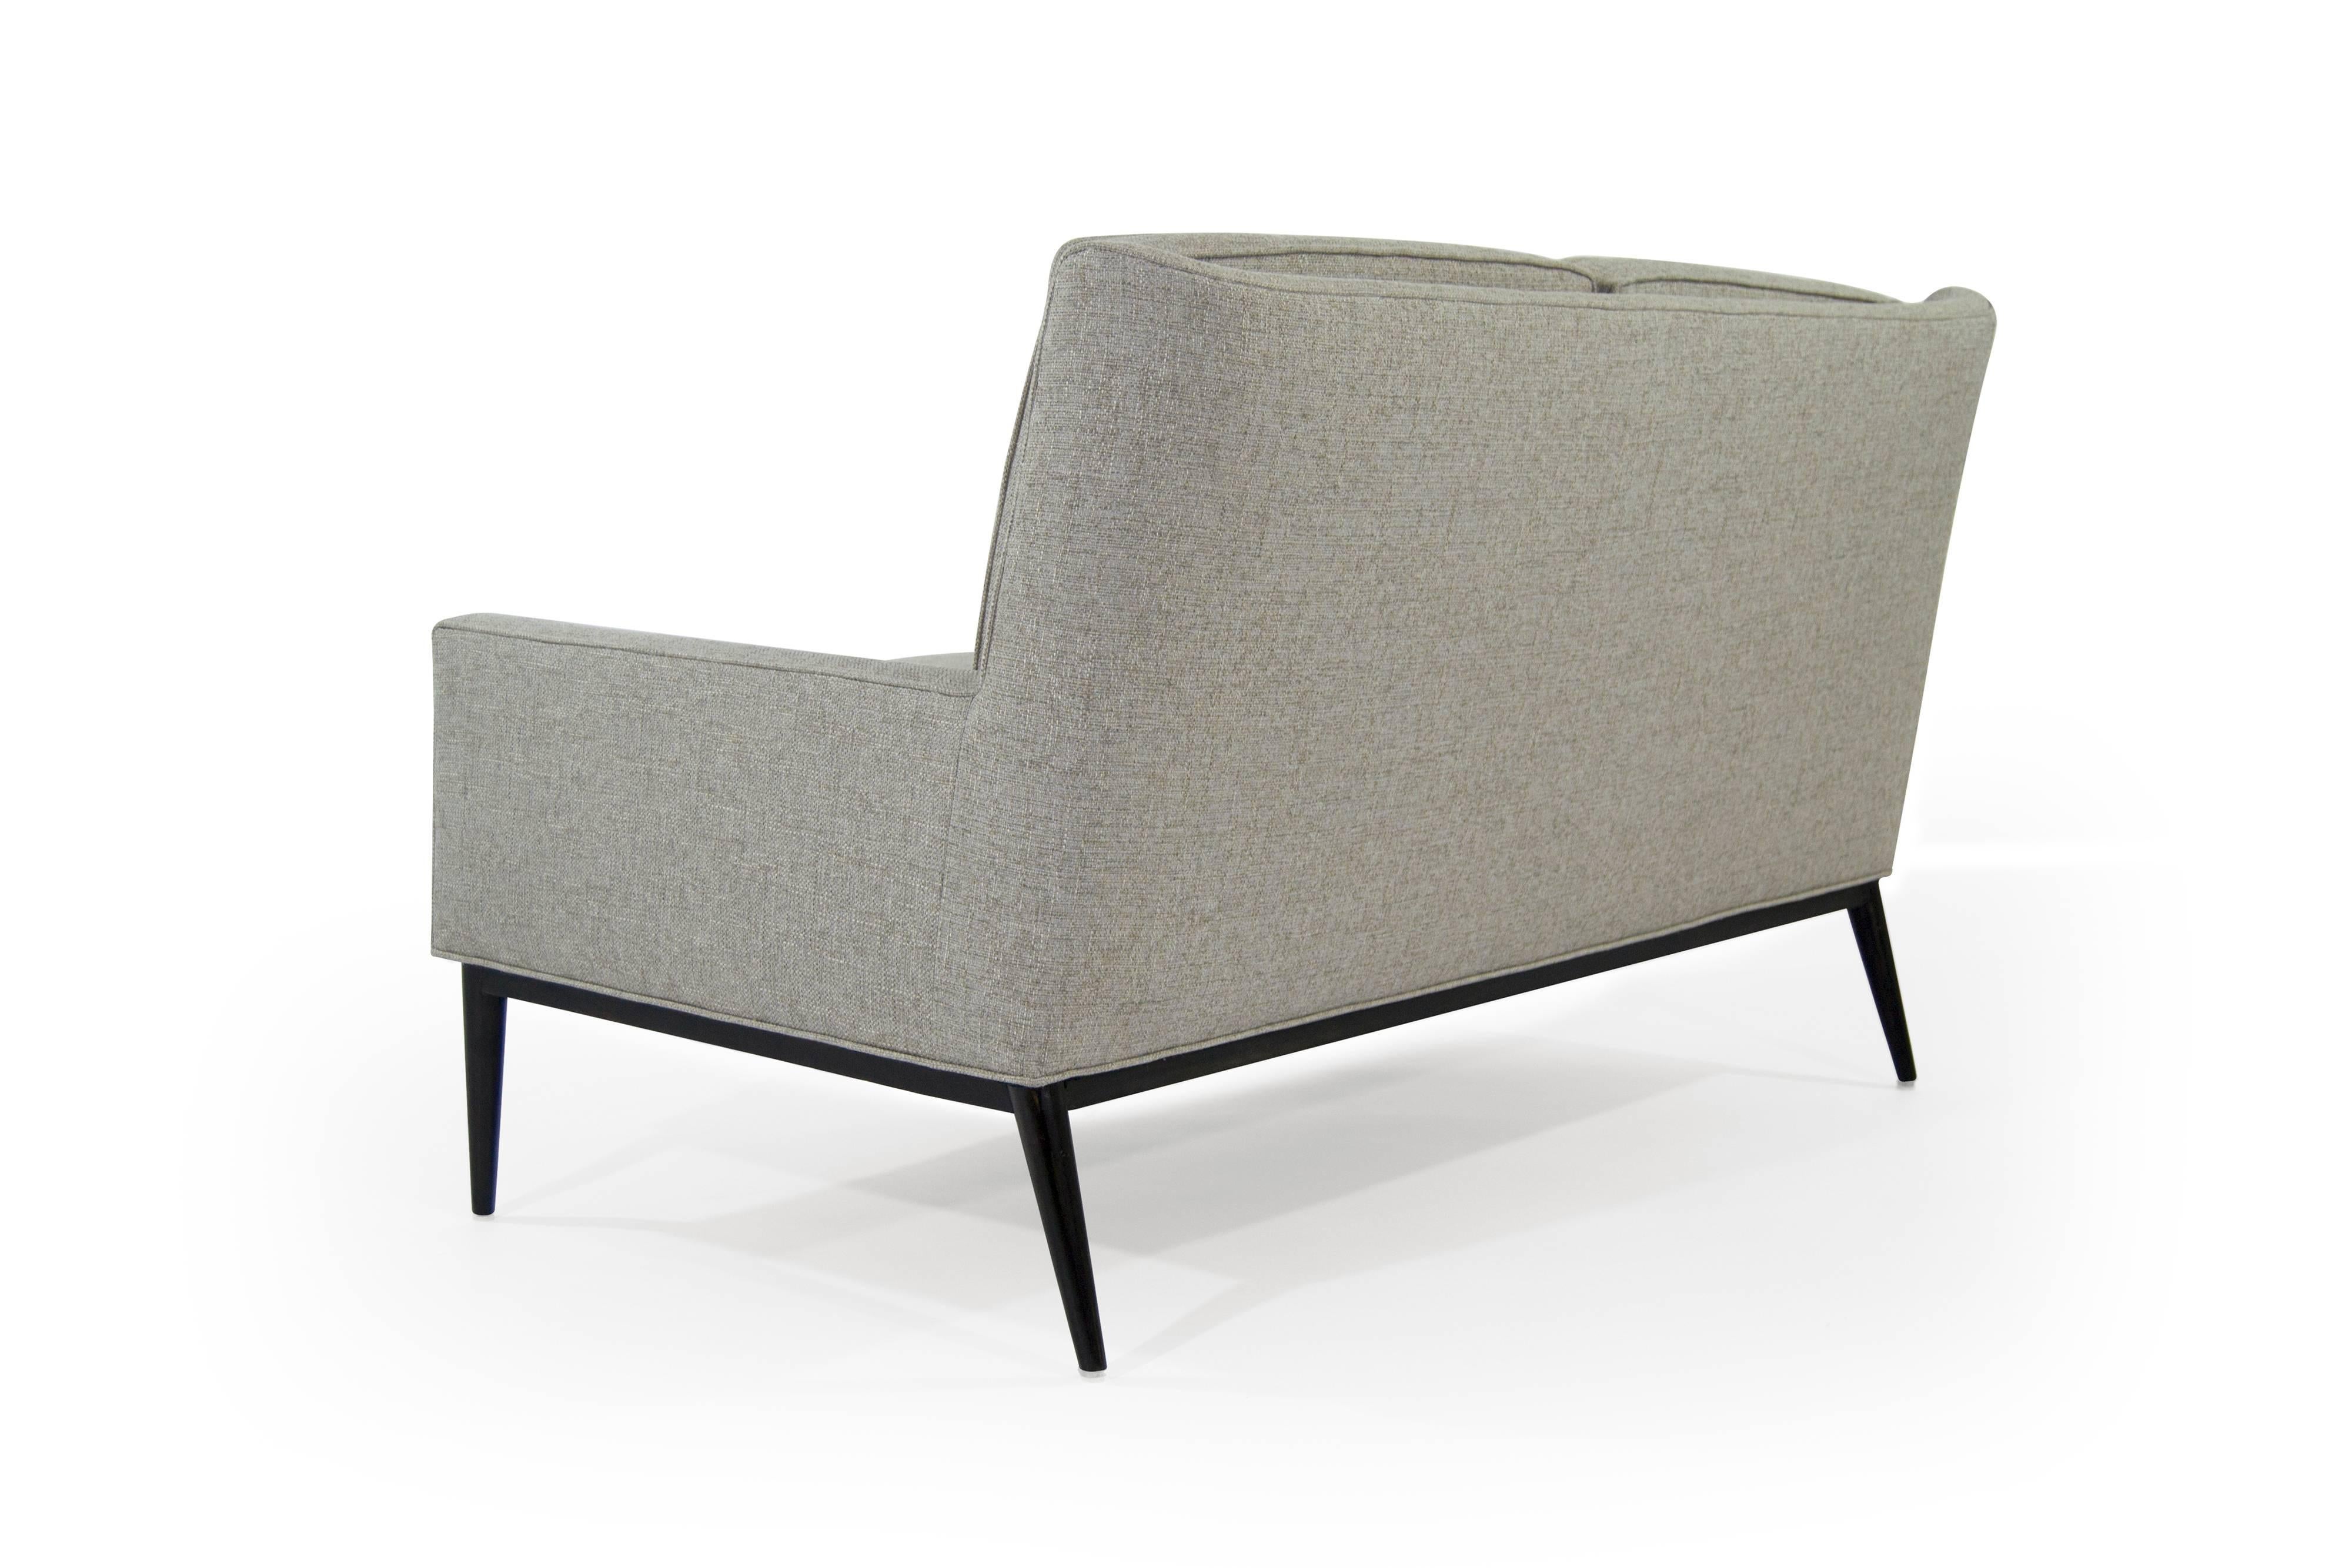 Rare loveseat designed by Paul McCobb for Directional, circa 1950s. Newly upholstered in taupe linen, base fully restored to its original espresso finish.